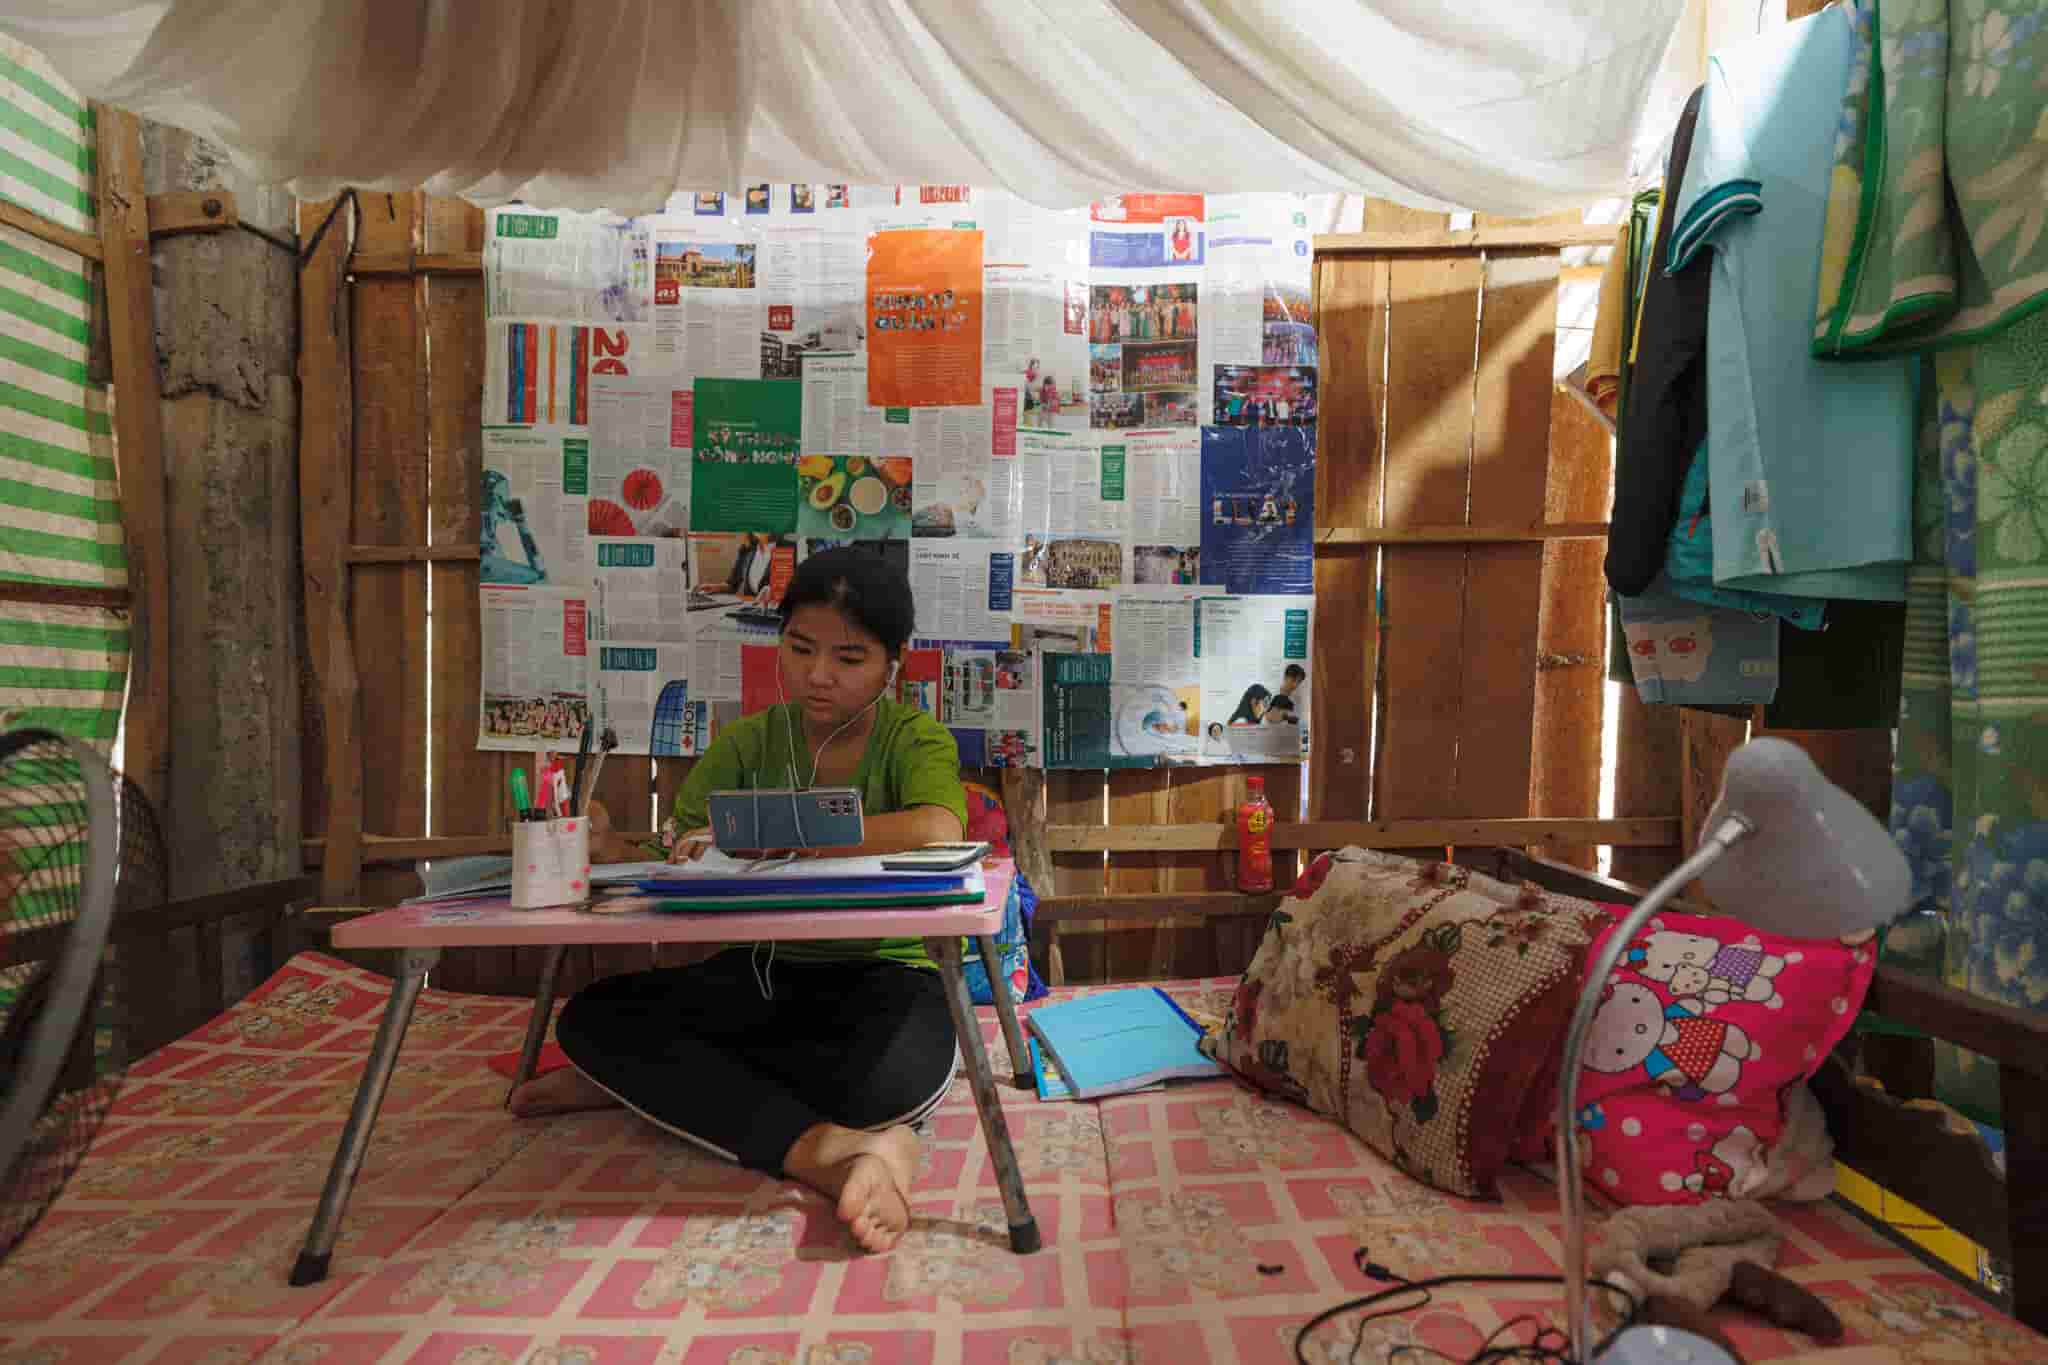 A craftswoman works on a quilt for Mekong Quilts in her home. Photo by Mervin Lee